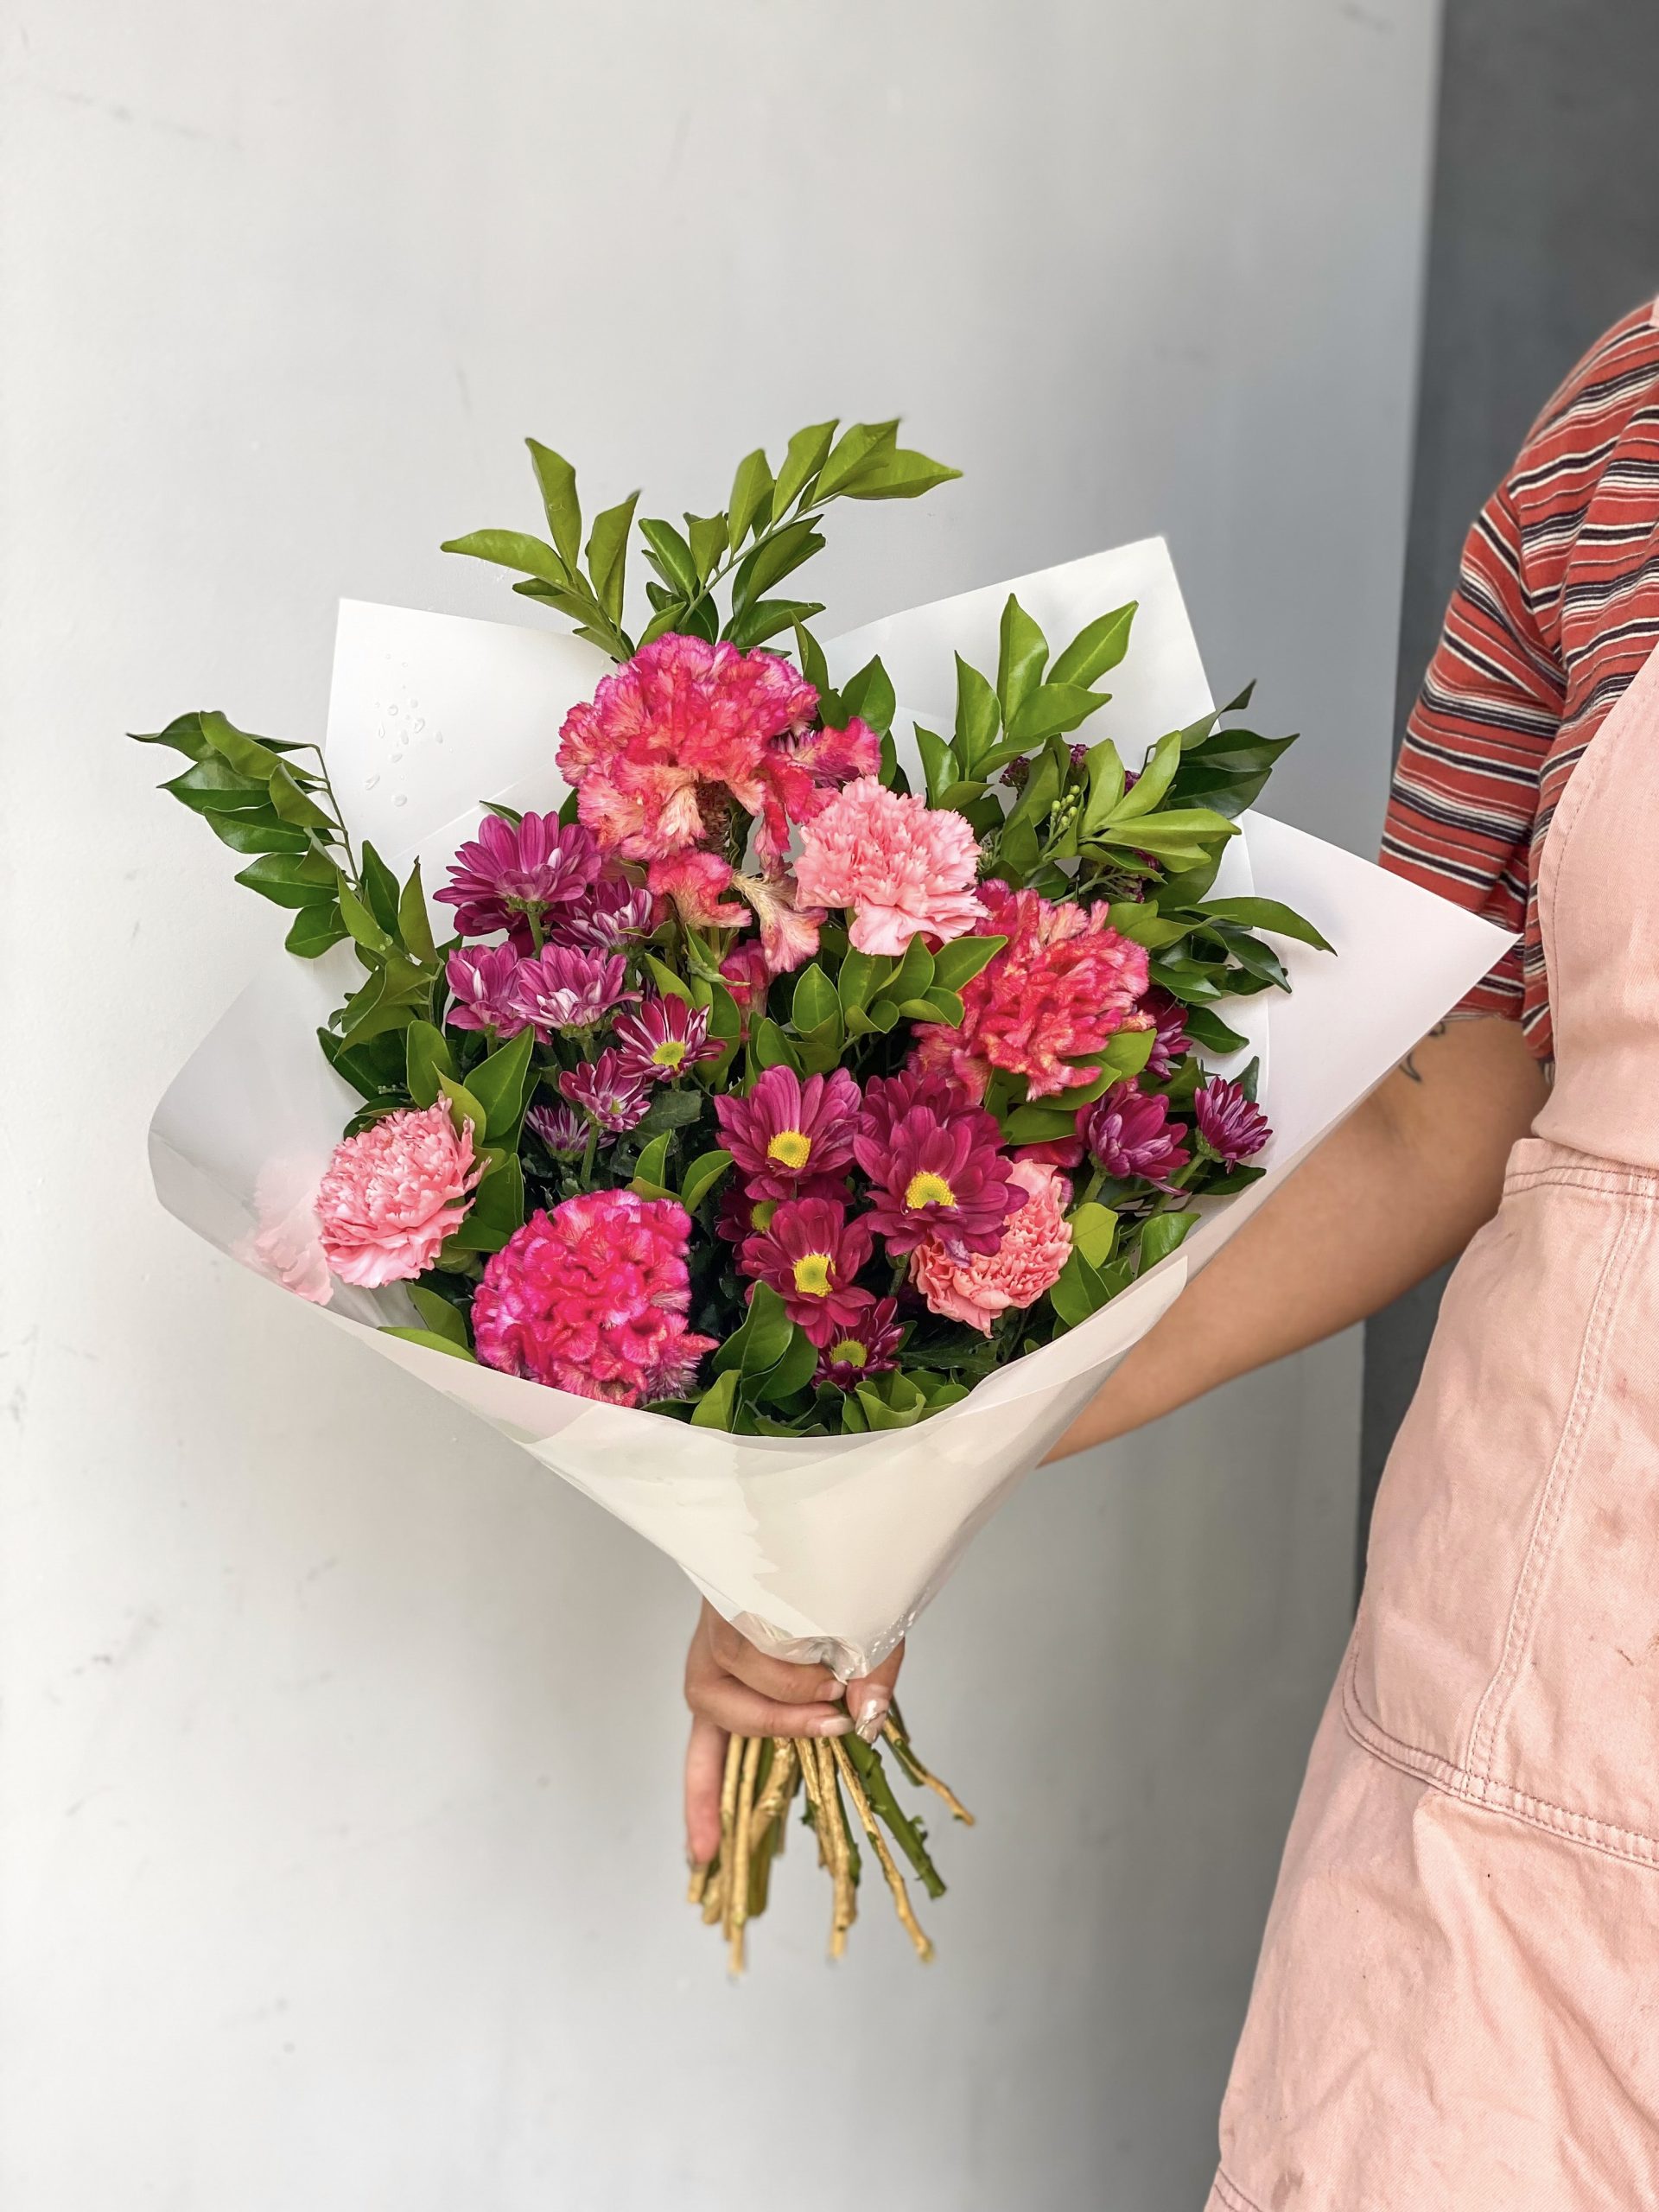 Bouquet of beatiful red and pink flowers | Featured Image for The Most Popular Annual Flowers 2022 blog on Poco Posy.